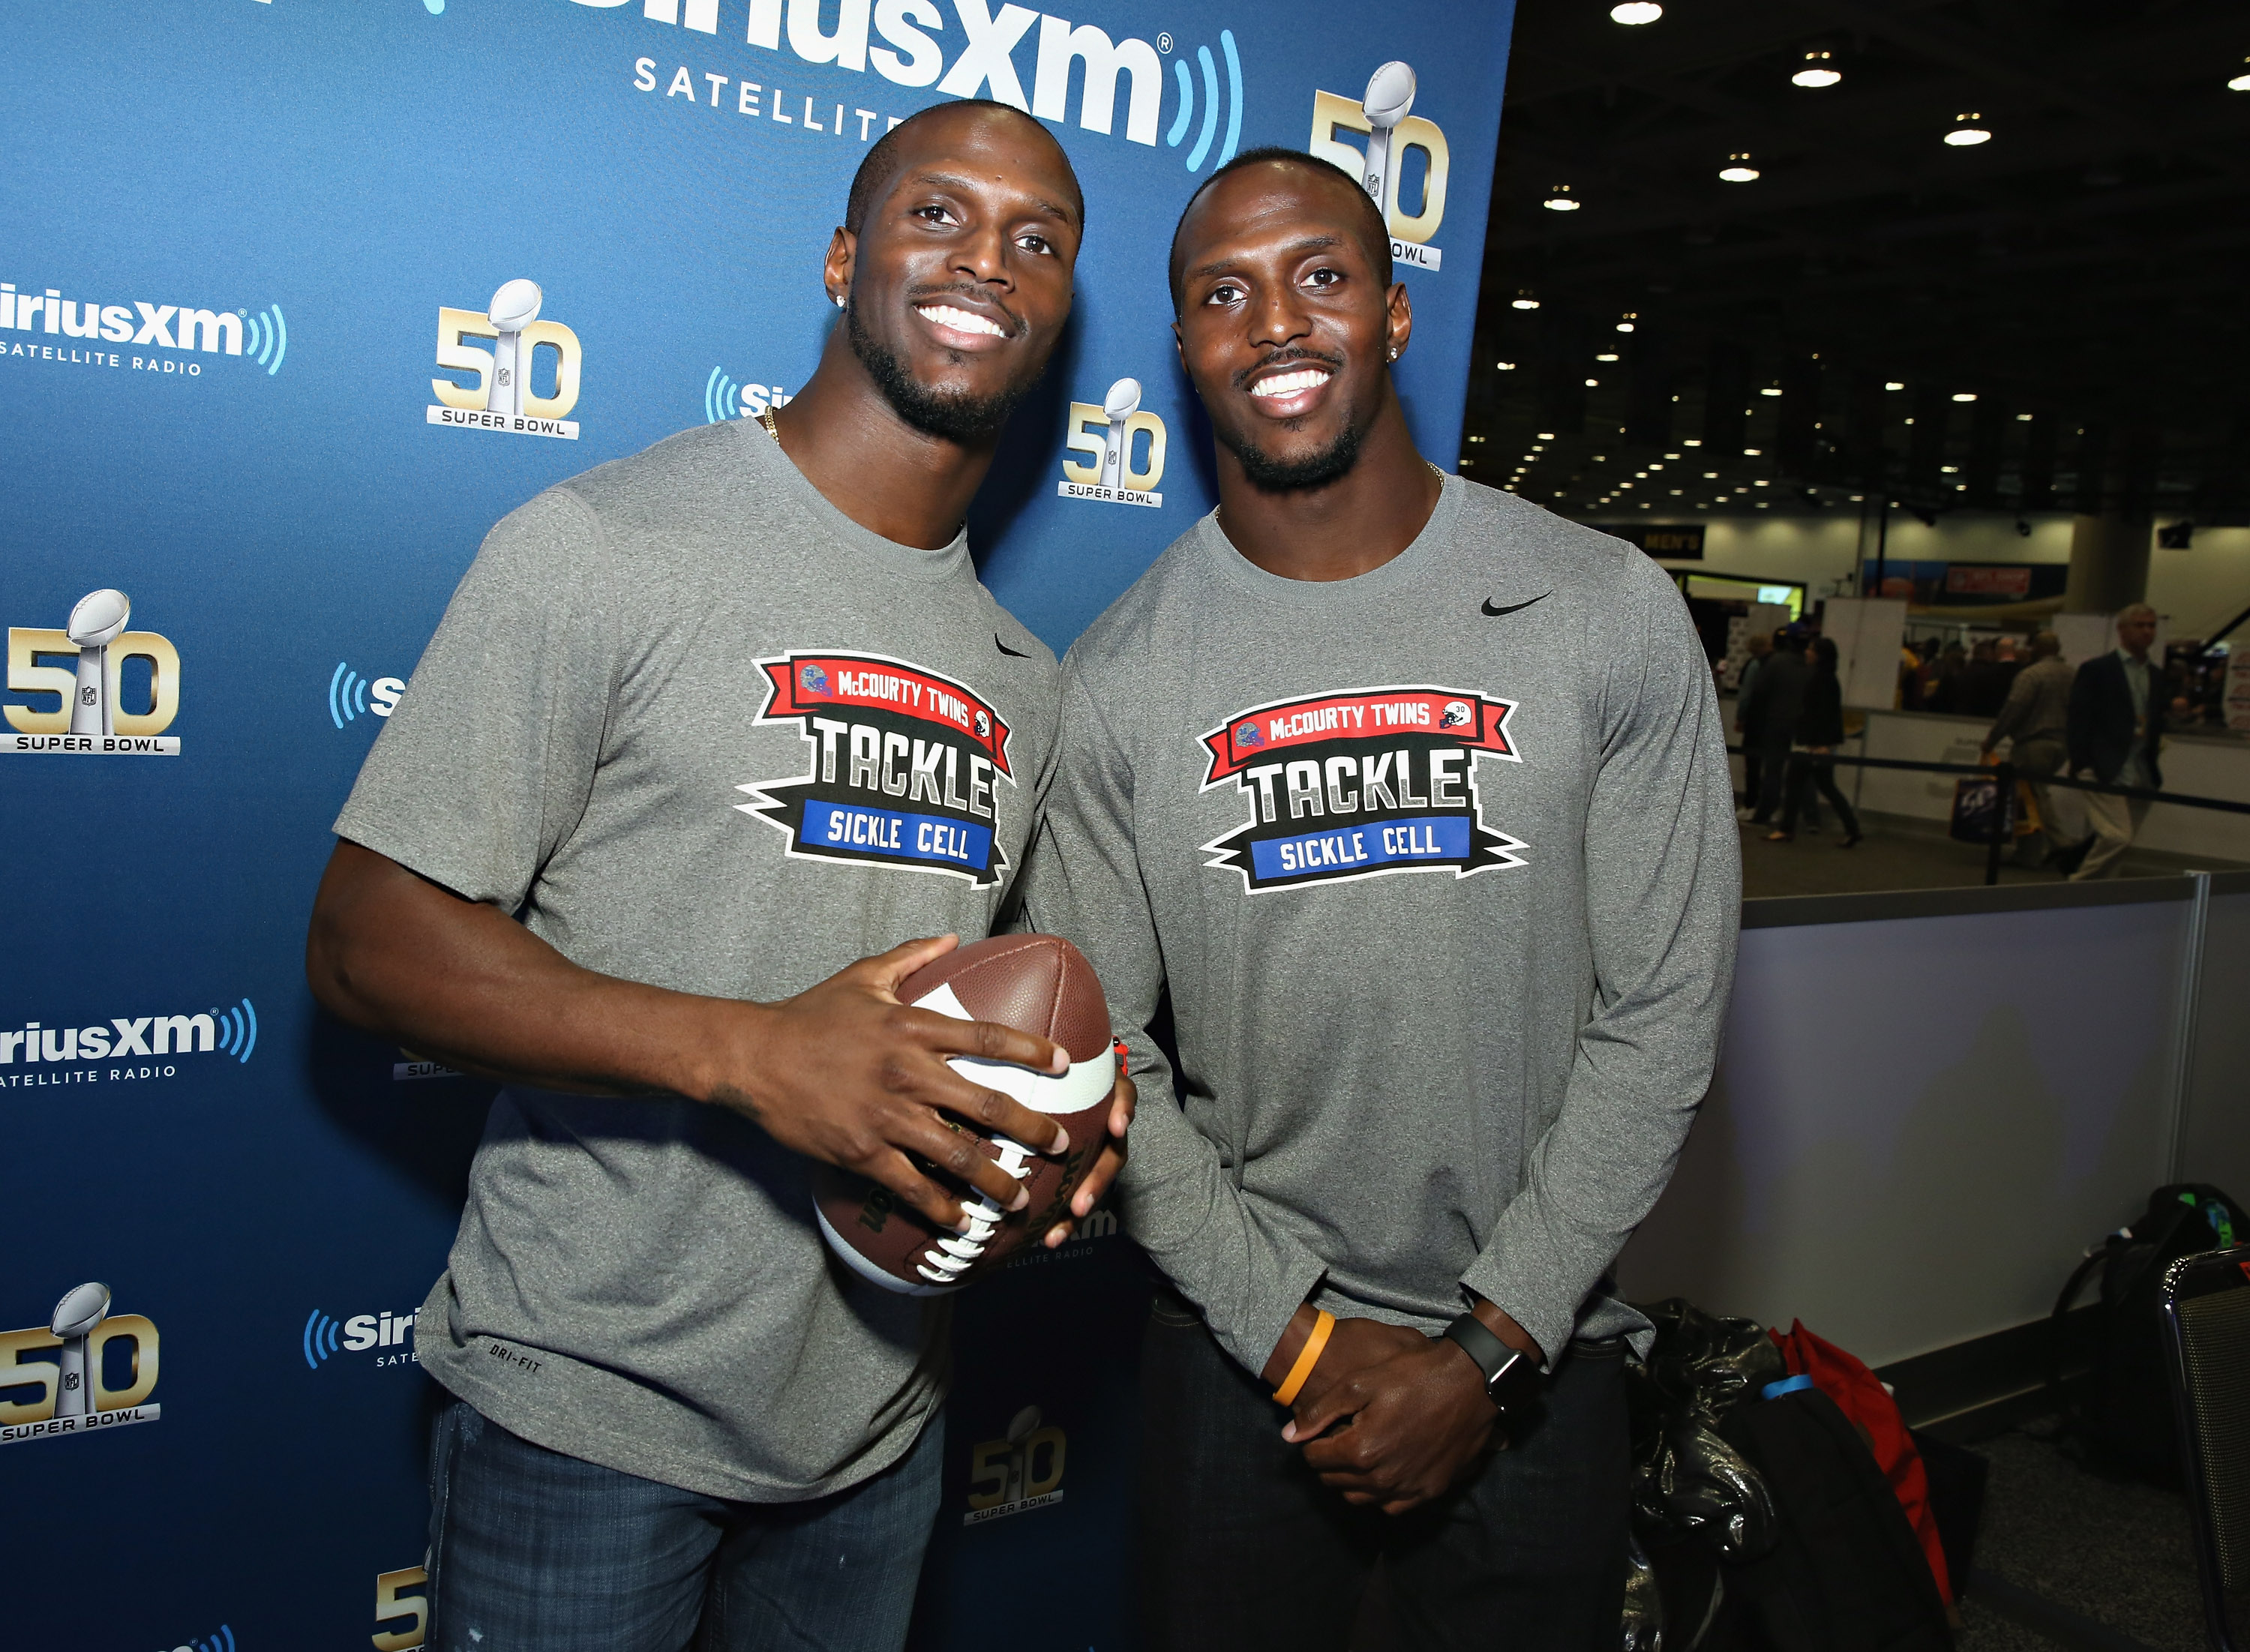 Jason McCourty of the Tennessee Titans and Devin McCourty of the New England Patriots visit the SiriusXM set at Super Bowl 50 Radio Row at the Moscone Center on February 4, 2016 in San Francisco, California.(Cindy Ord/Getty Images for SiriusXM)